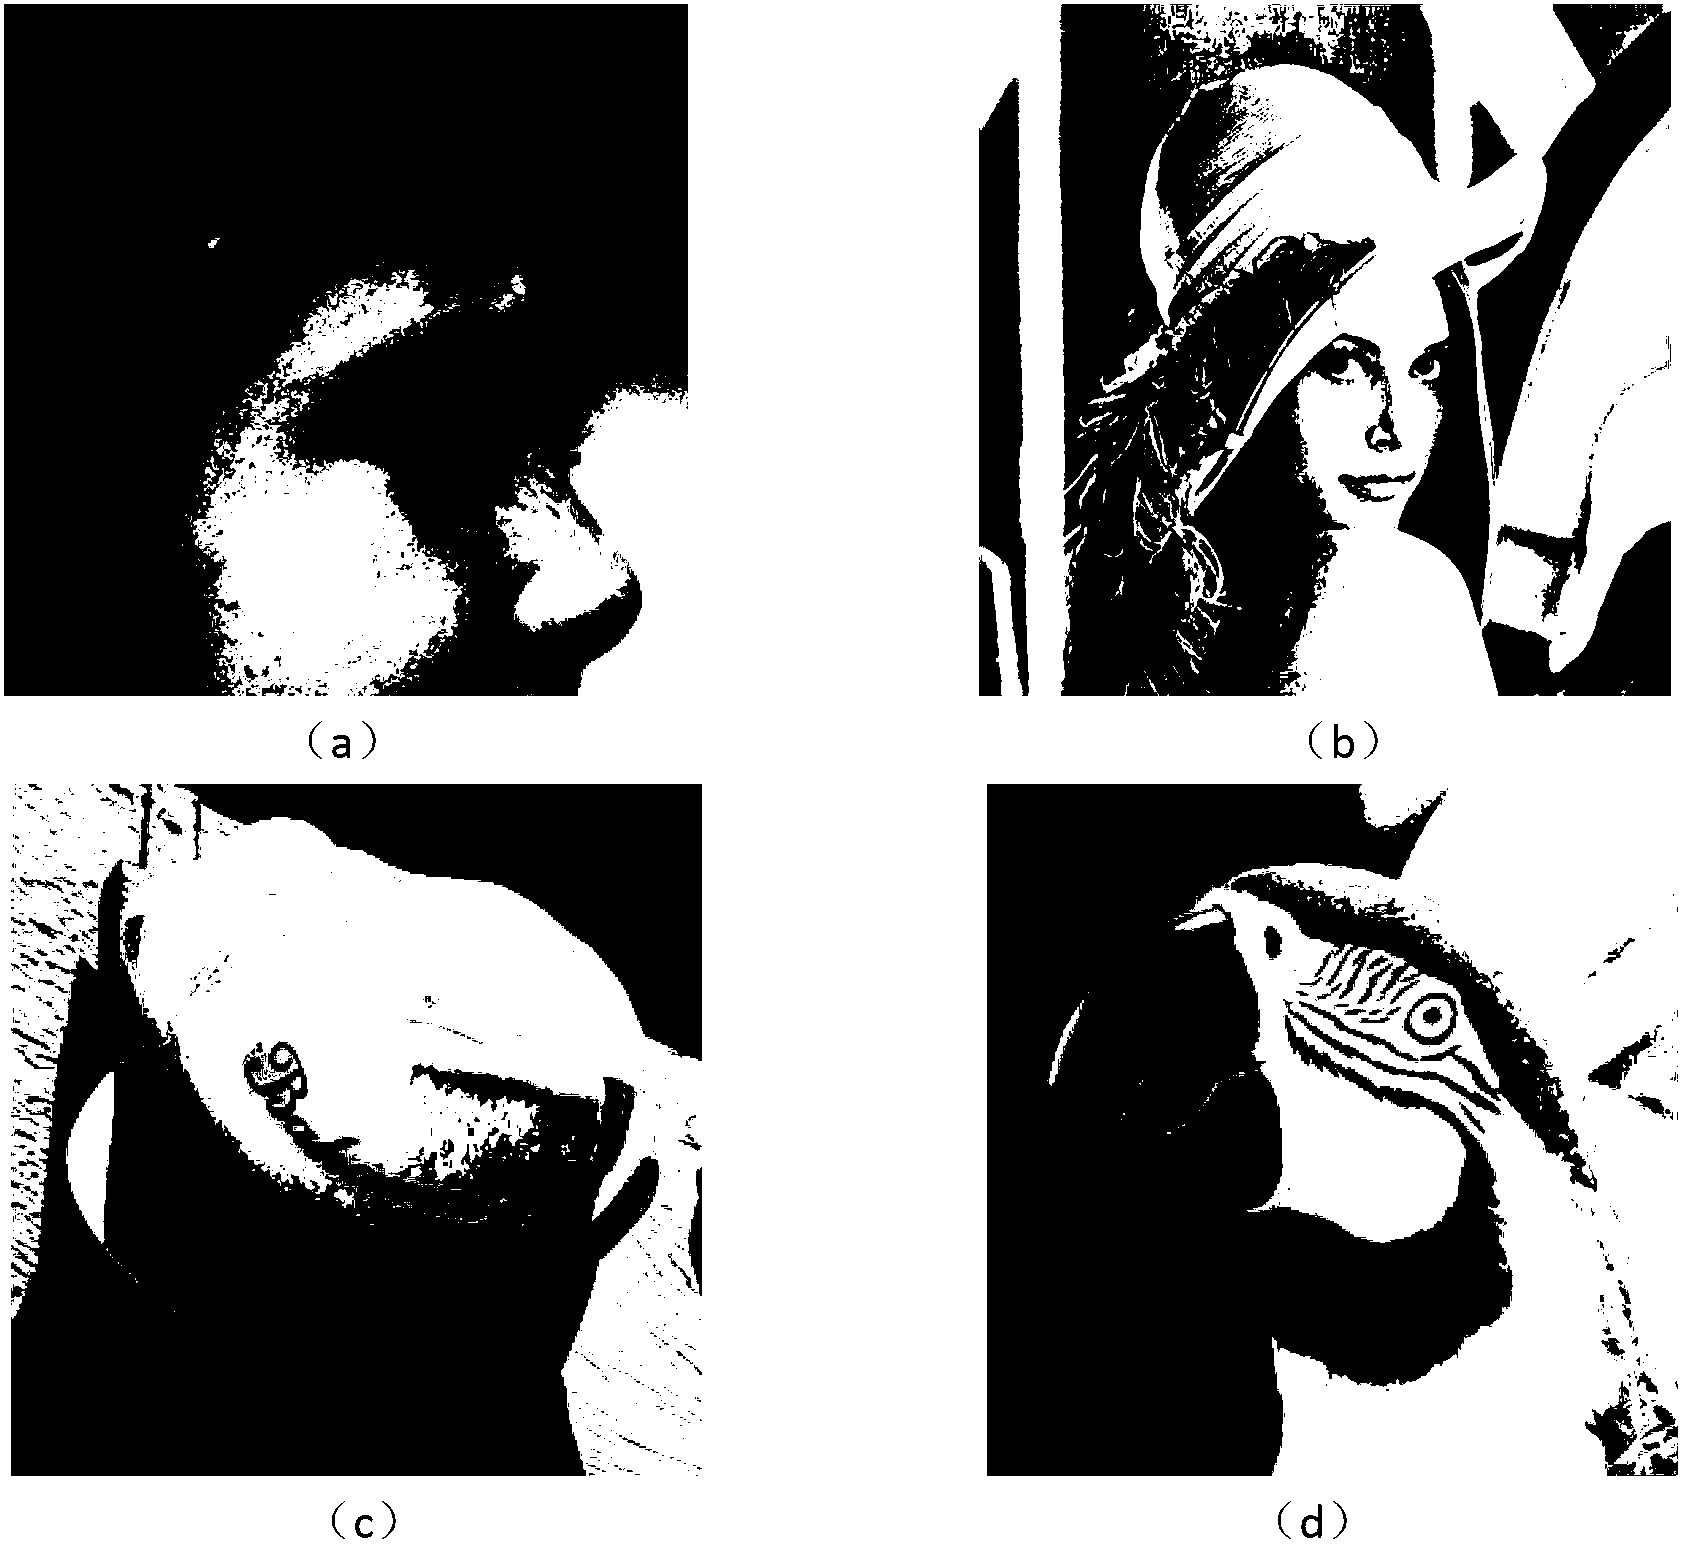 Image super-resolution reconstruction method based on dictionary learning and structure similarity